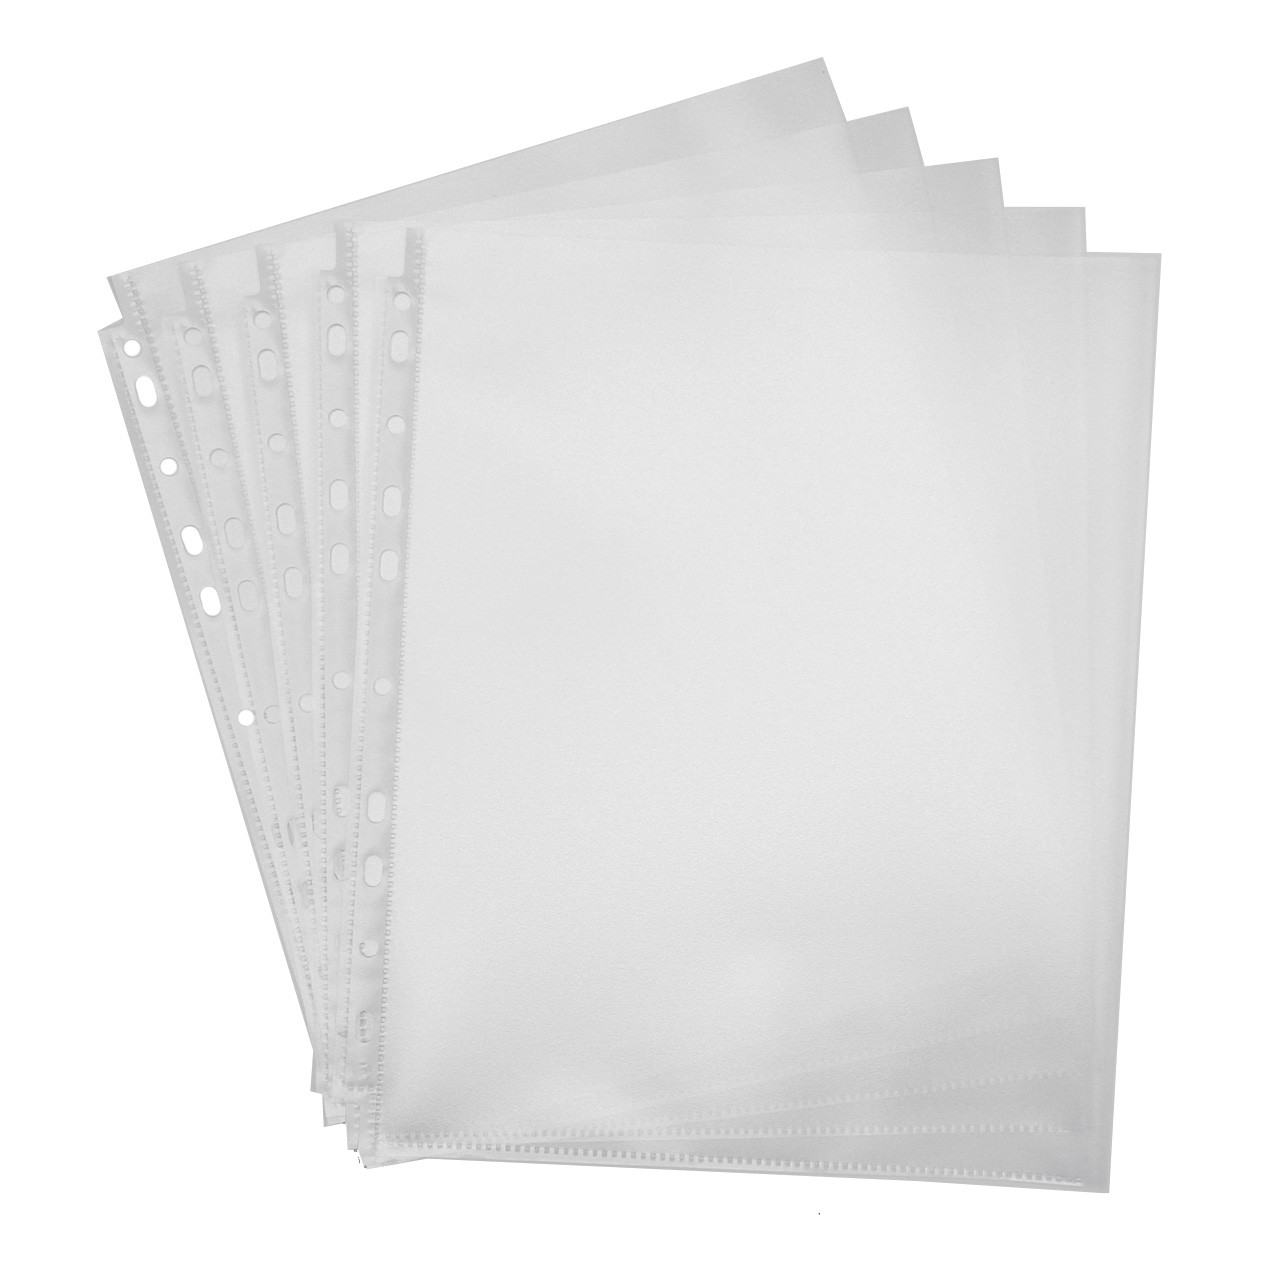 High-Capacity Top-Loading Sheet Protectors, Letter Size, 10 Pack